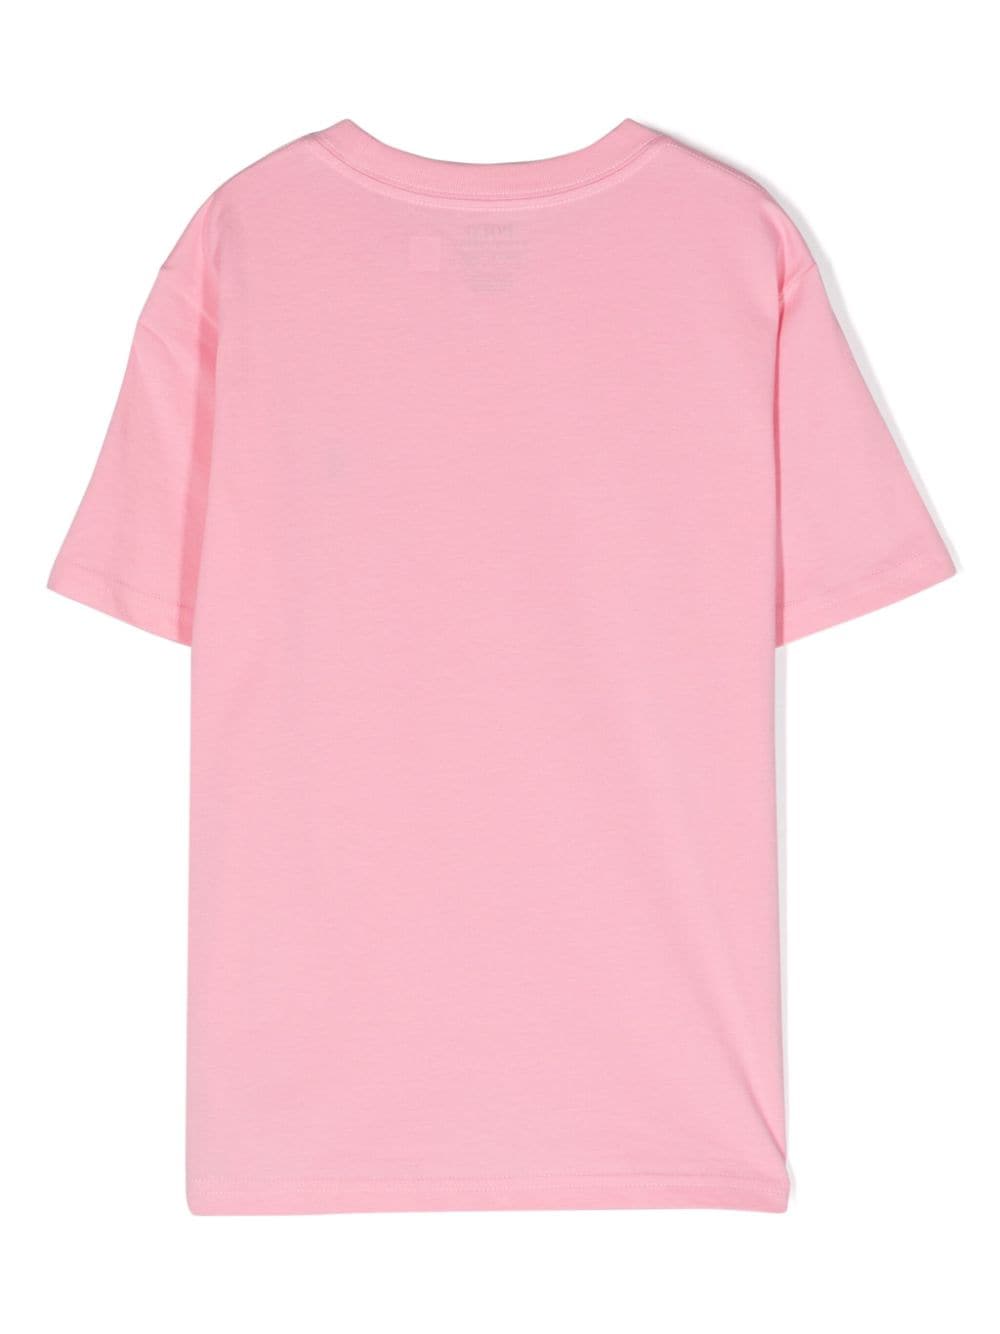 Polo Pony cotton T-shirt<BR/><BR/><BR/>